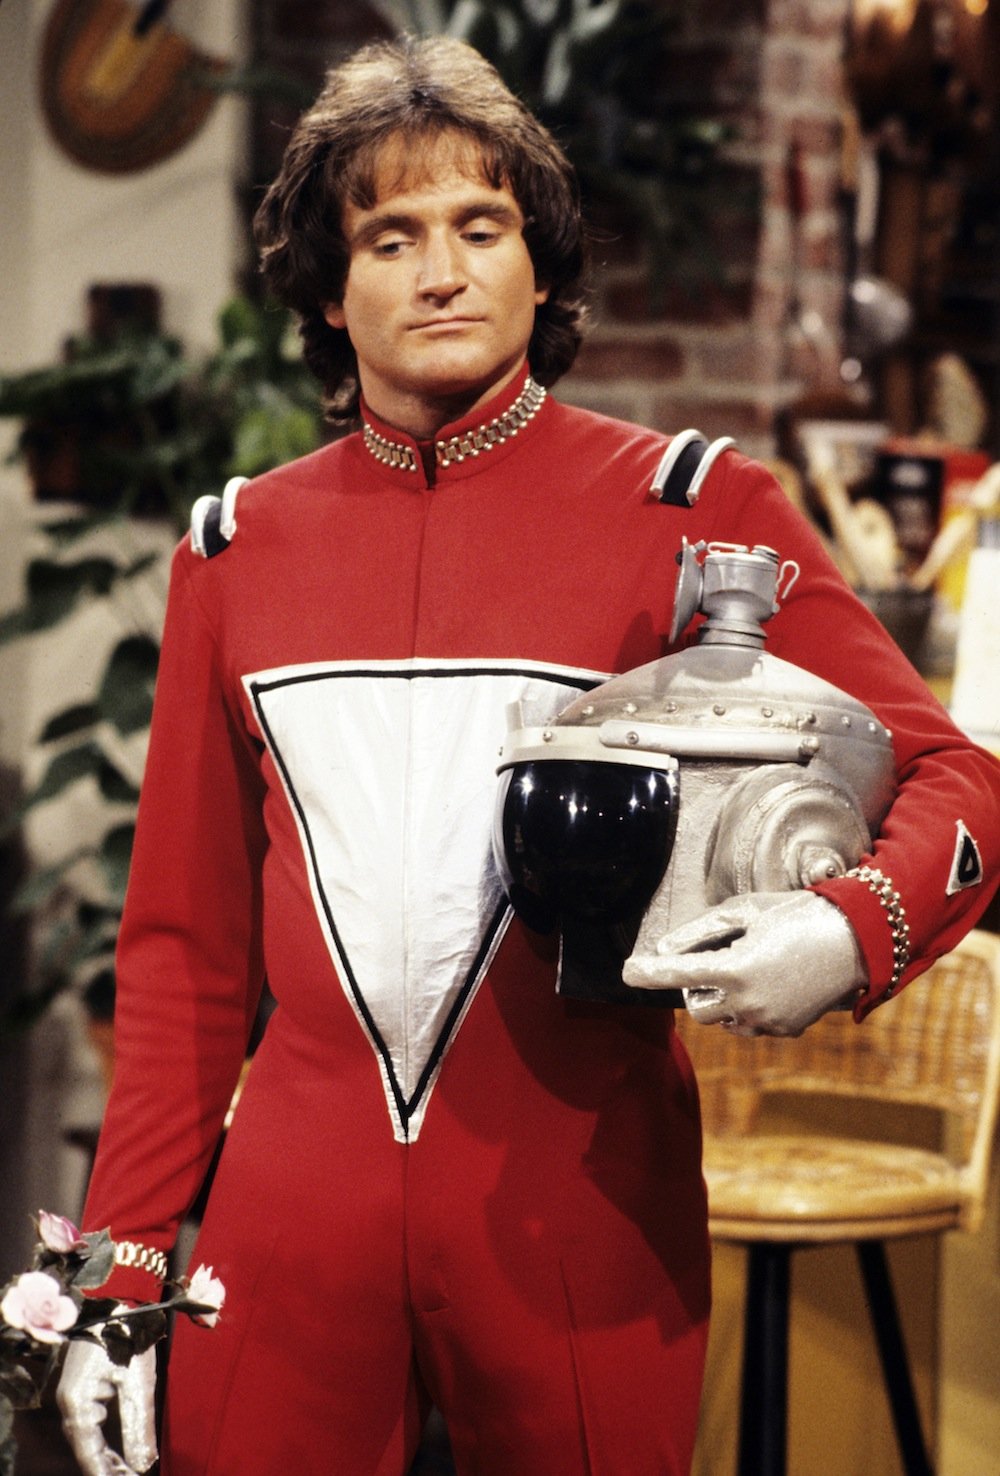 inspired helmet from mork and mindy and the other limits Modelos de